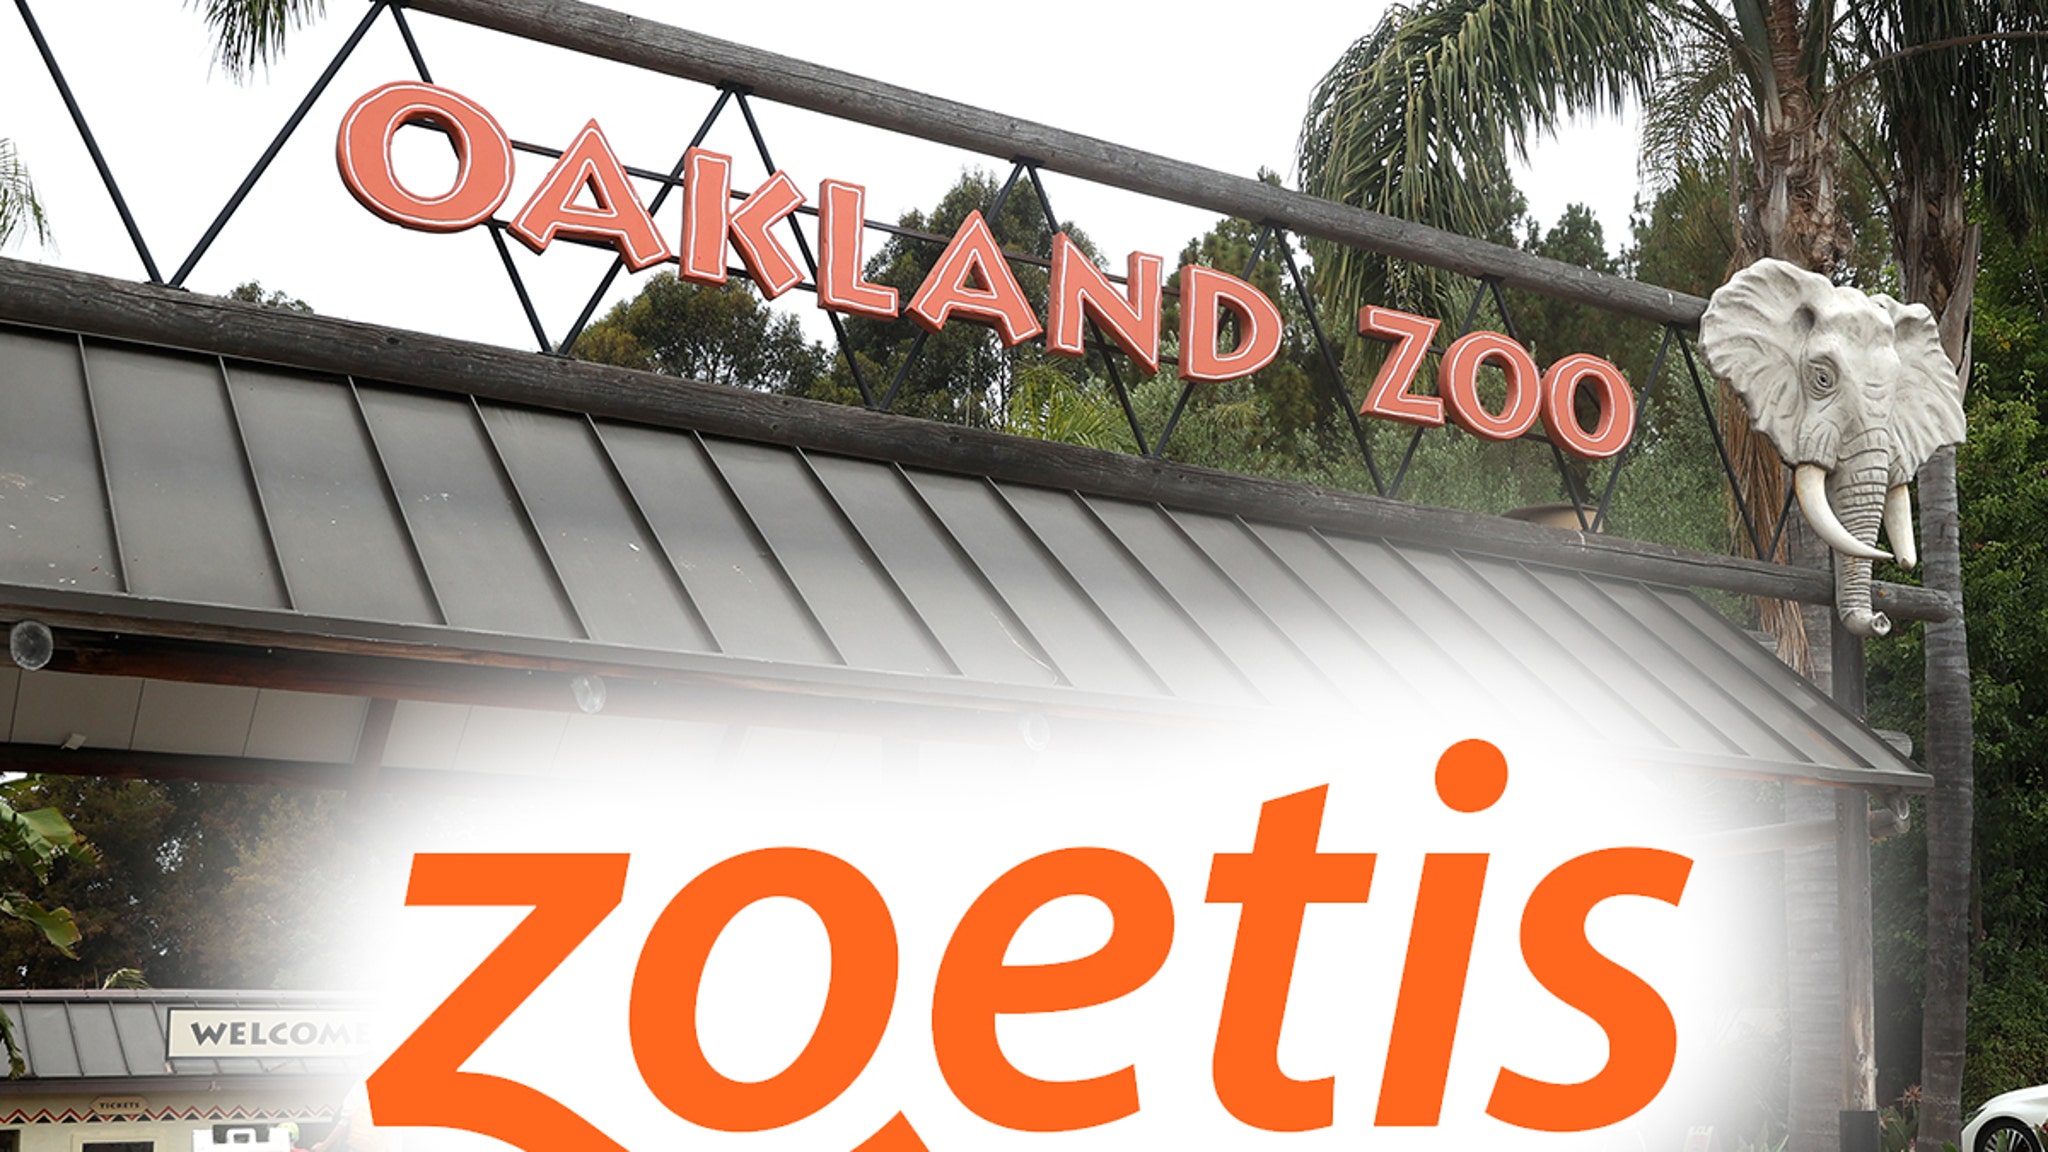 Animals at Oakland Zoo receive experimental COVID vaccine all at once